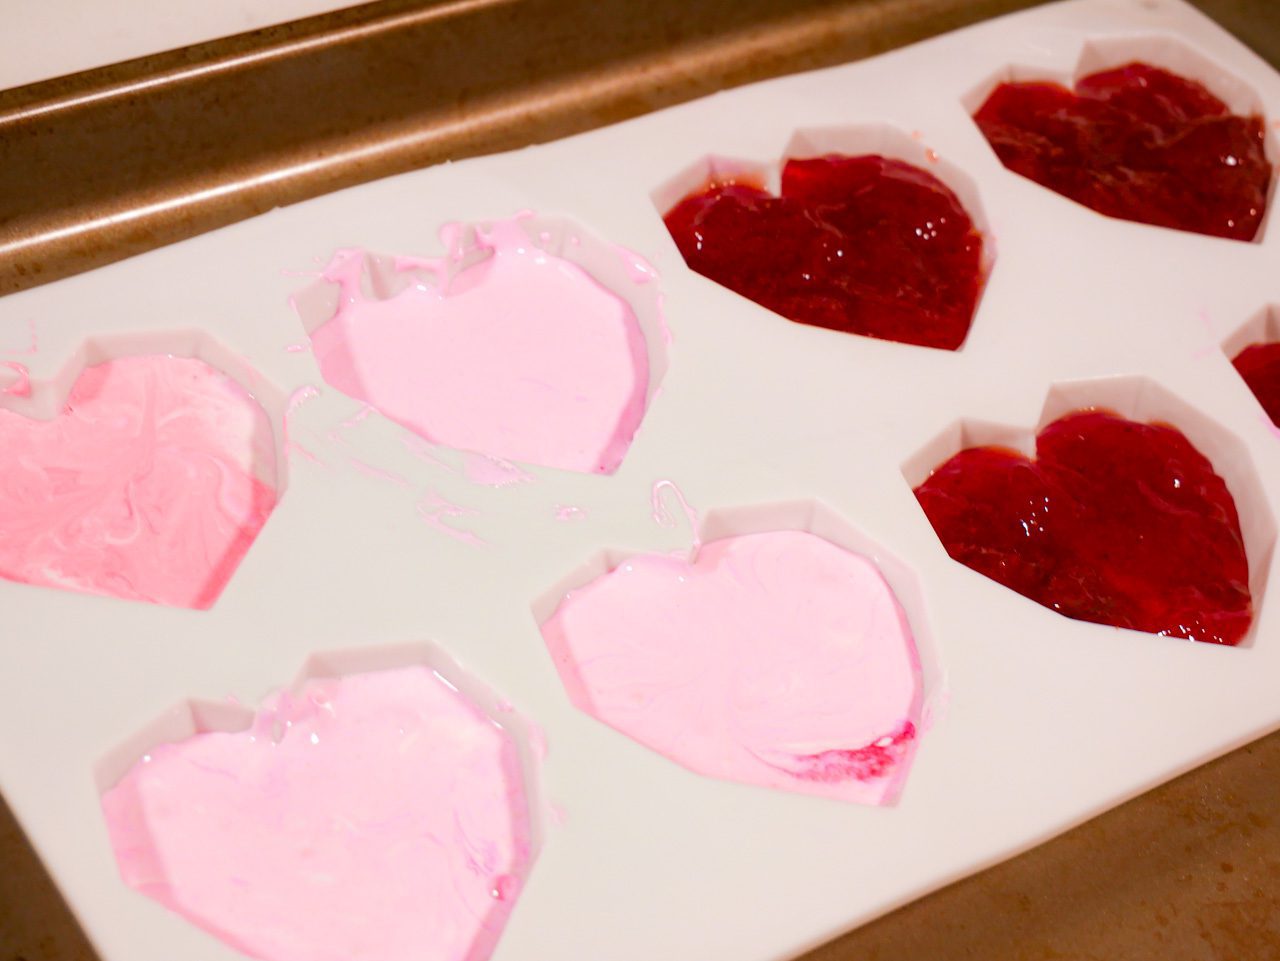 Fruit Jelly and Marshmallow fluff in heart-shaped silicone molds.